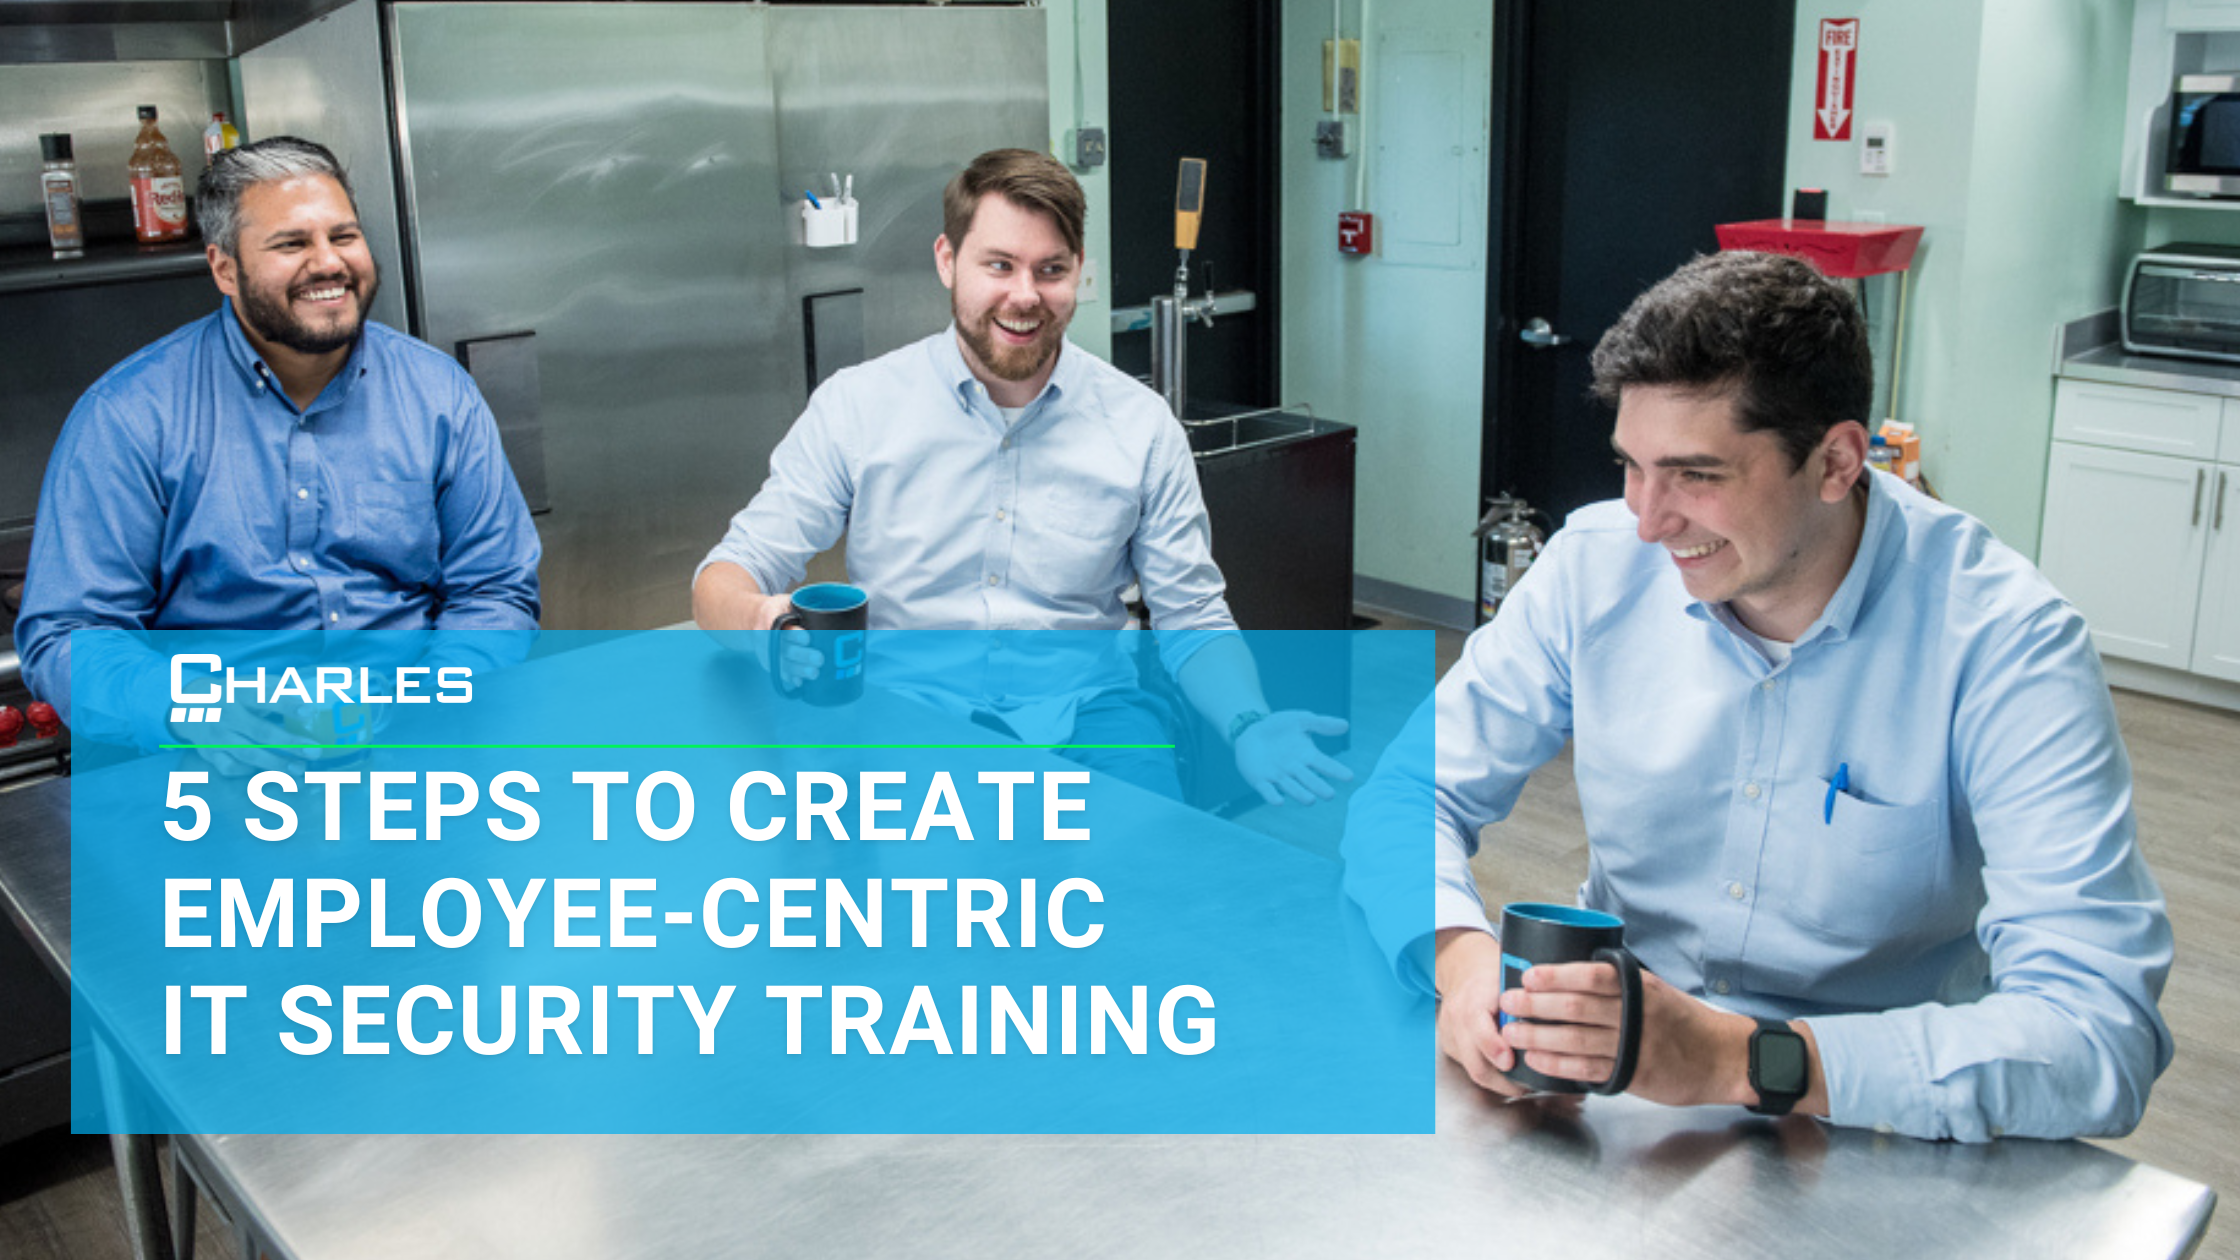 5 Steps to Create Employee-Centric IT Security Training